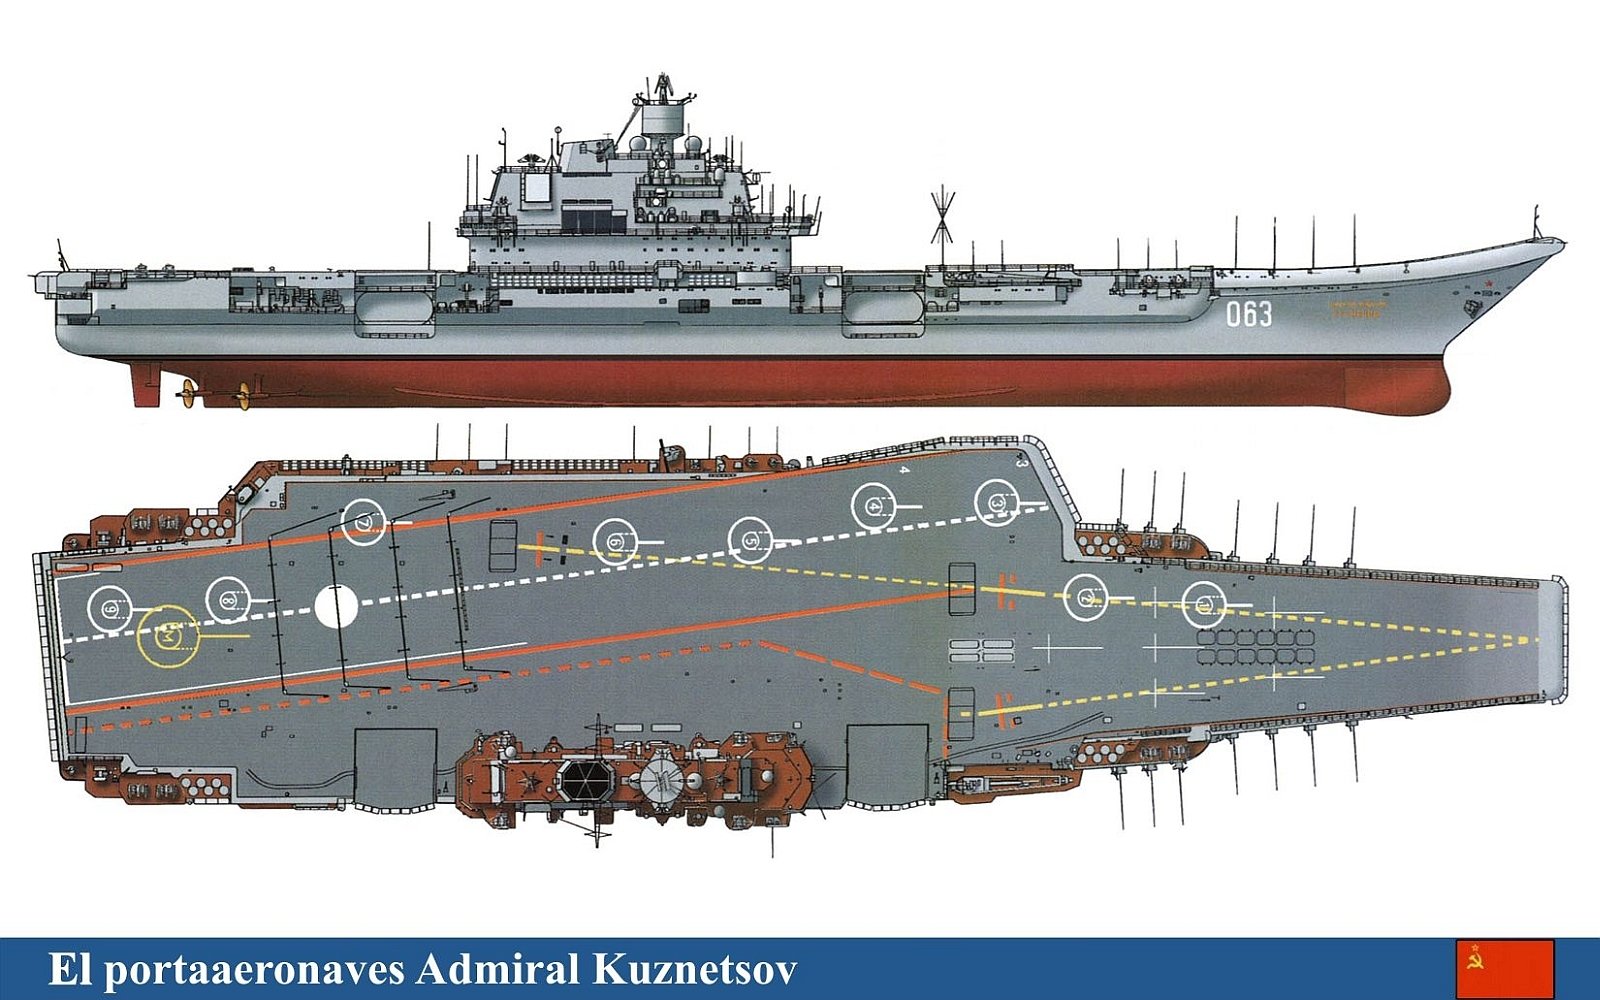 Russian Aircraft Carrier Admiral Kuznetsov Backgrounds, Compatible - PC, Mobile, Gadgets| 1600x1000 px